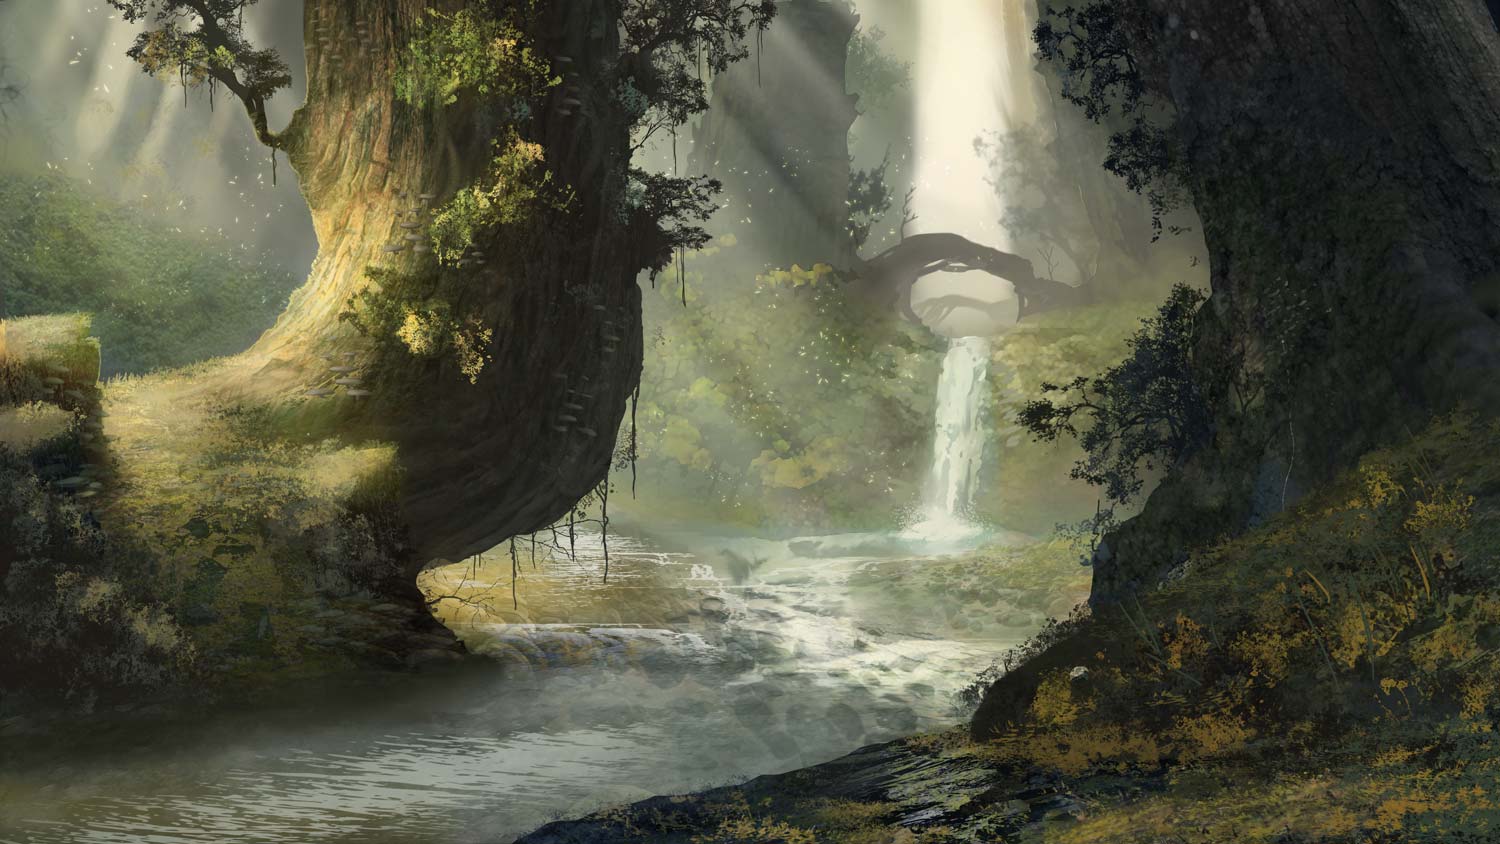 Final painting from Udemy enviroment course